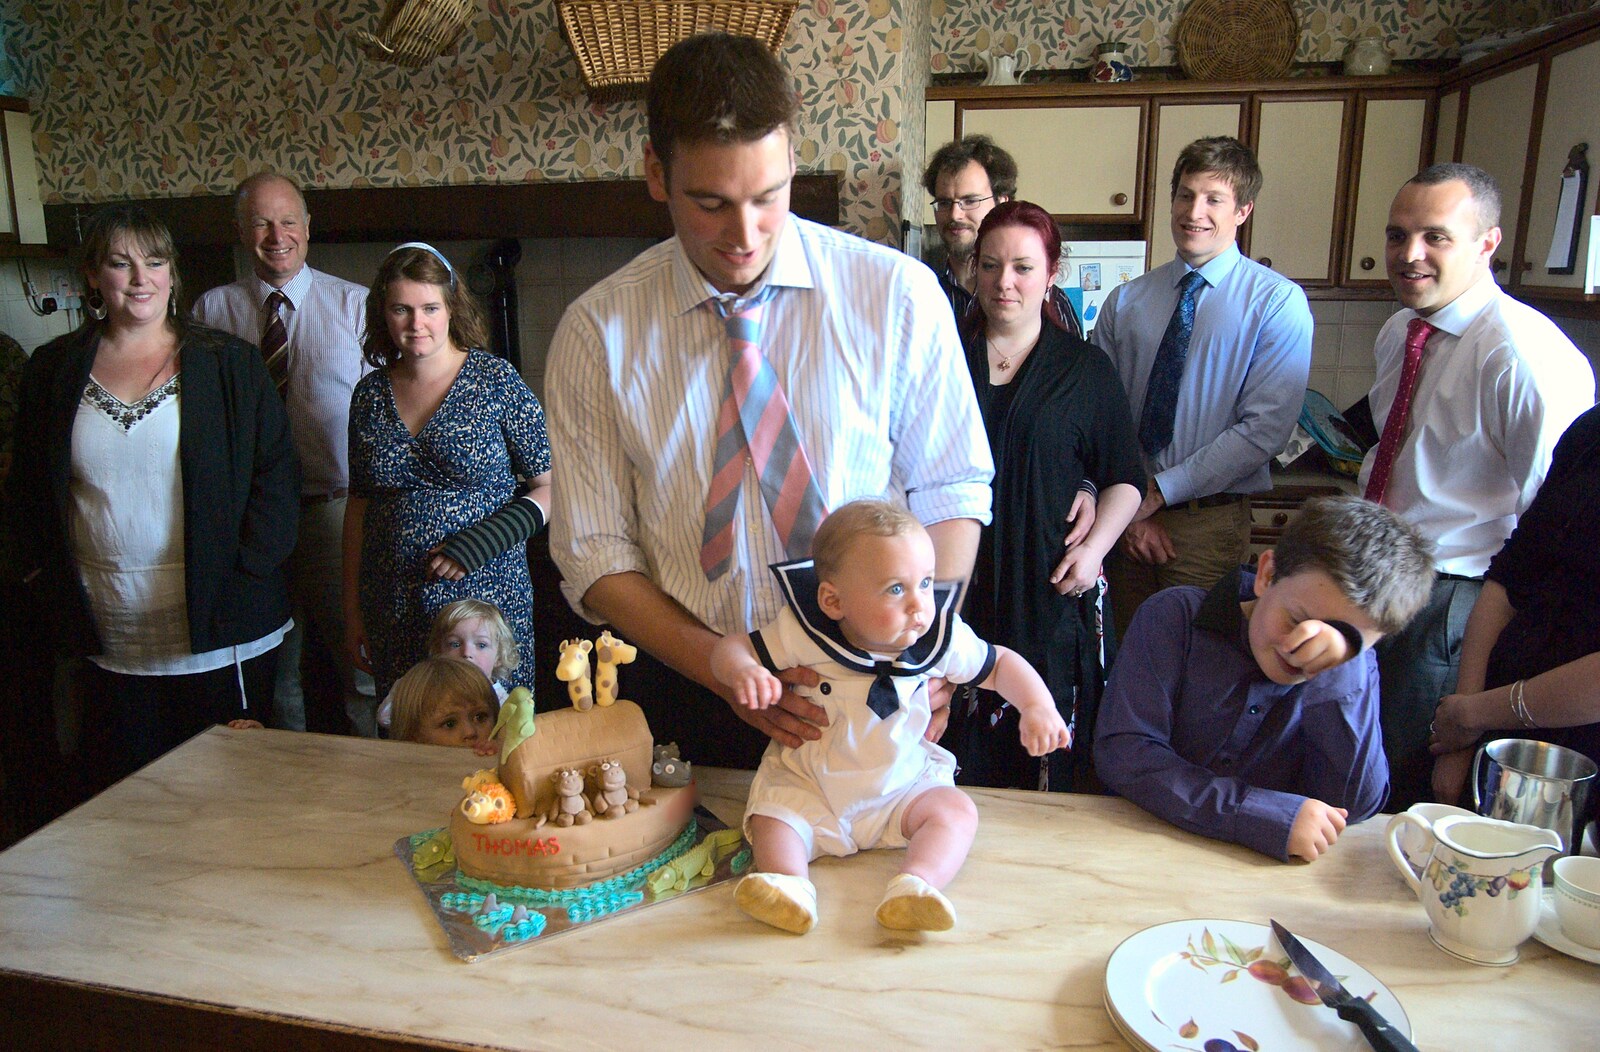 Stephen with Thomas from A Christening, Wilford, Northamptonshire - 22nd May 2011